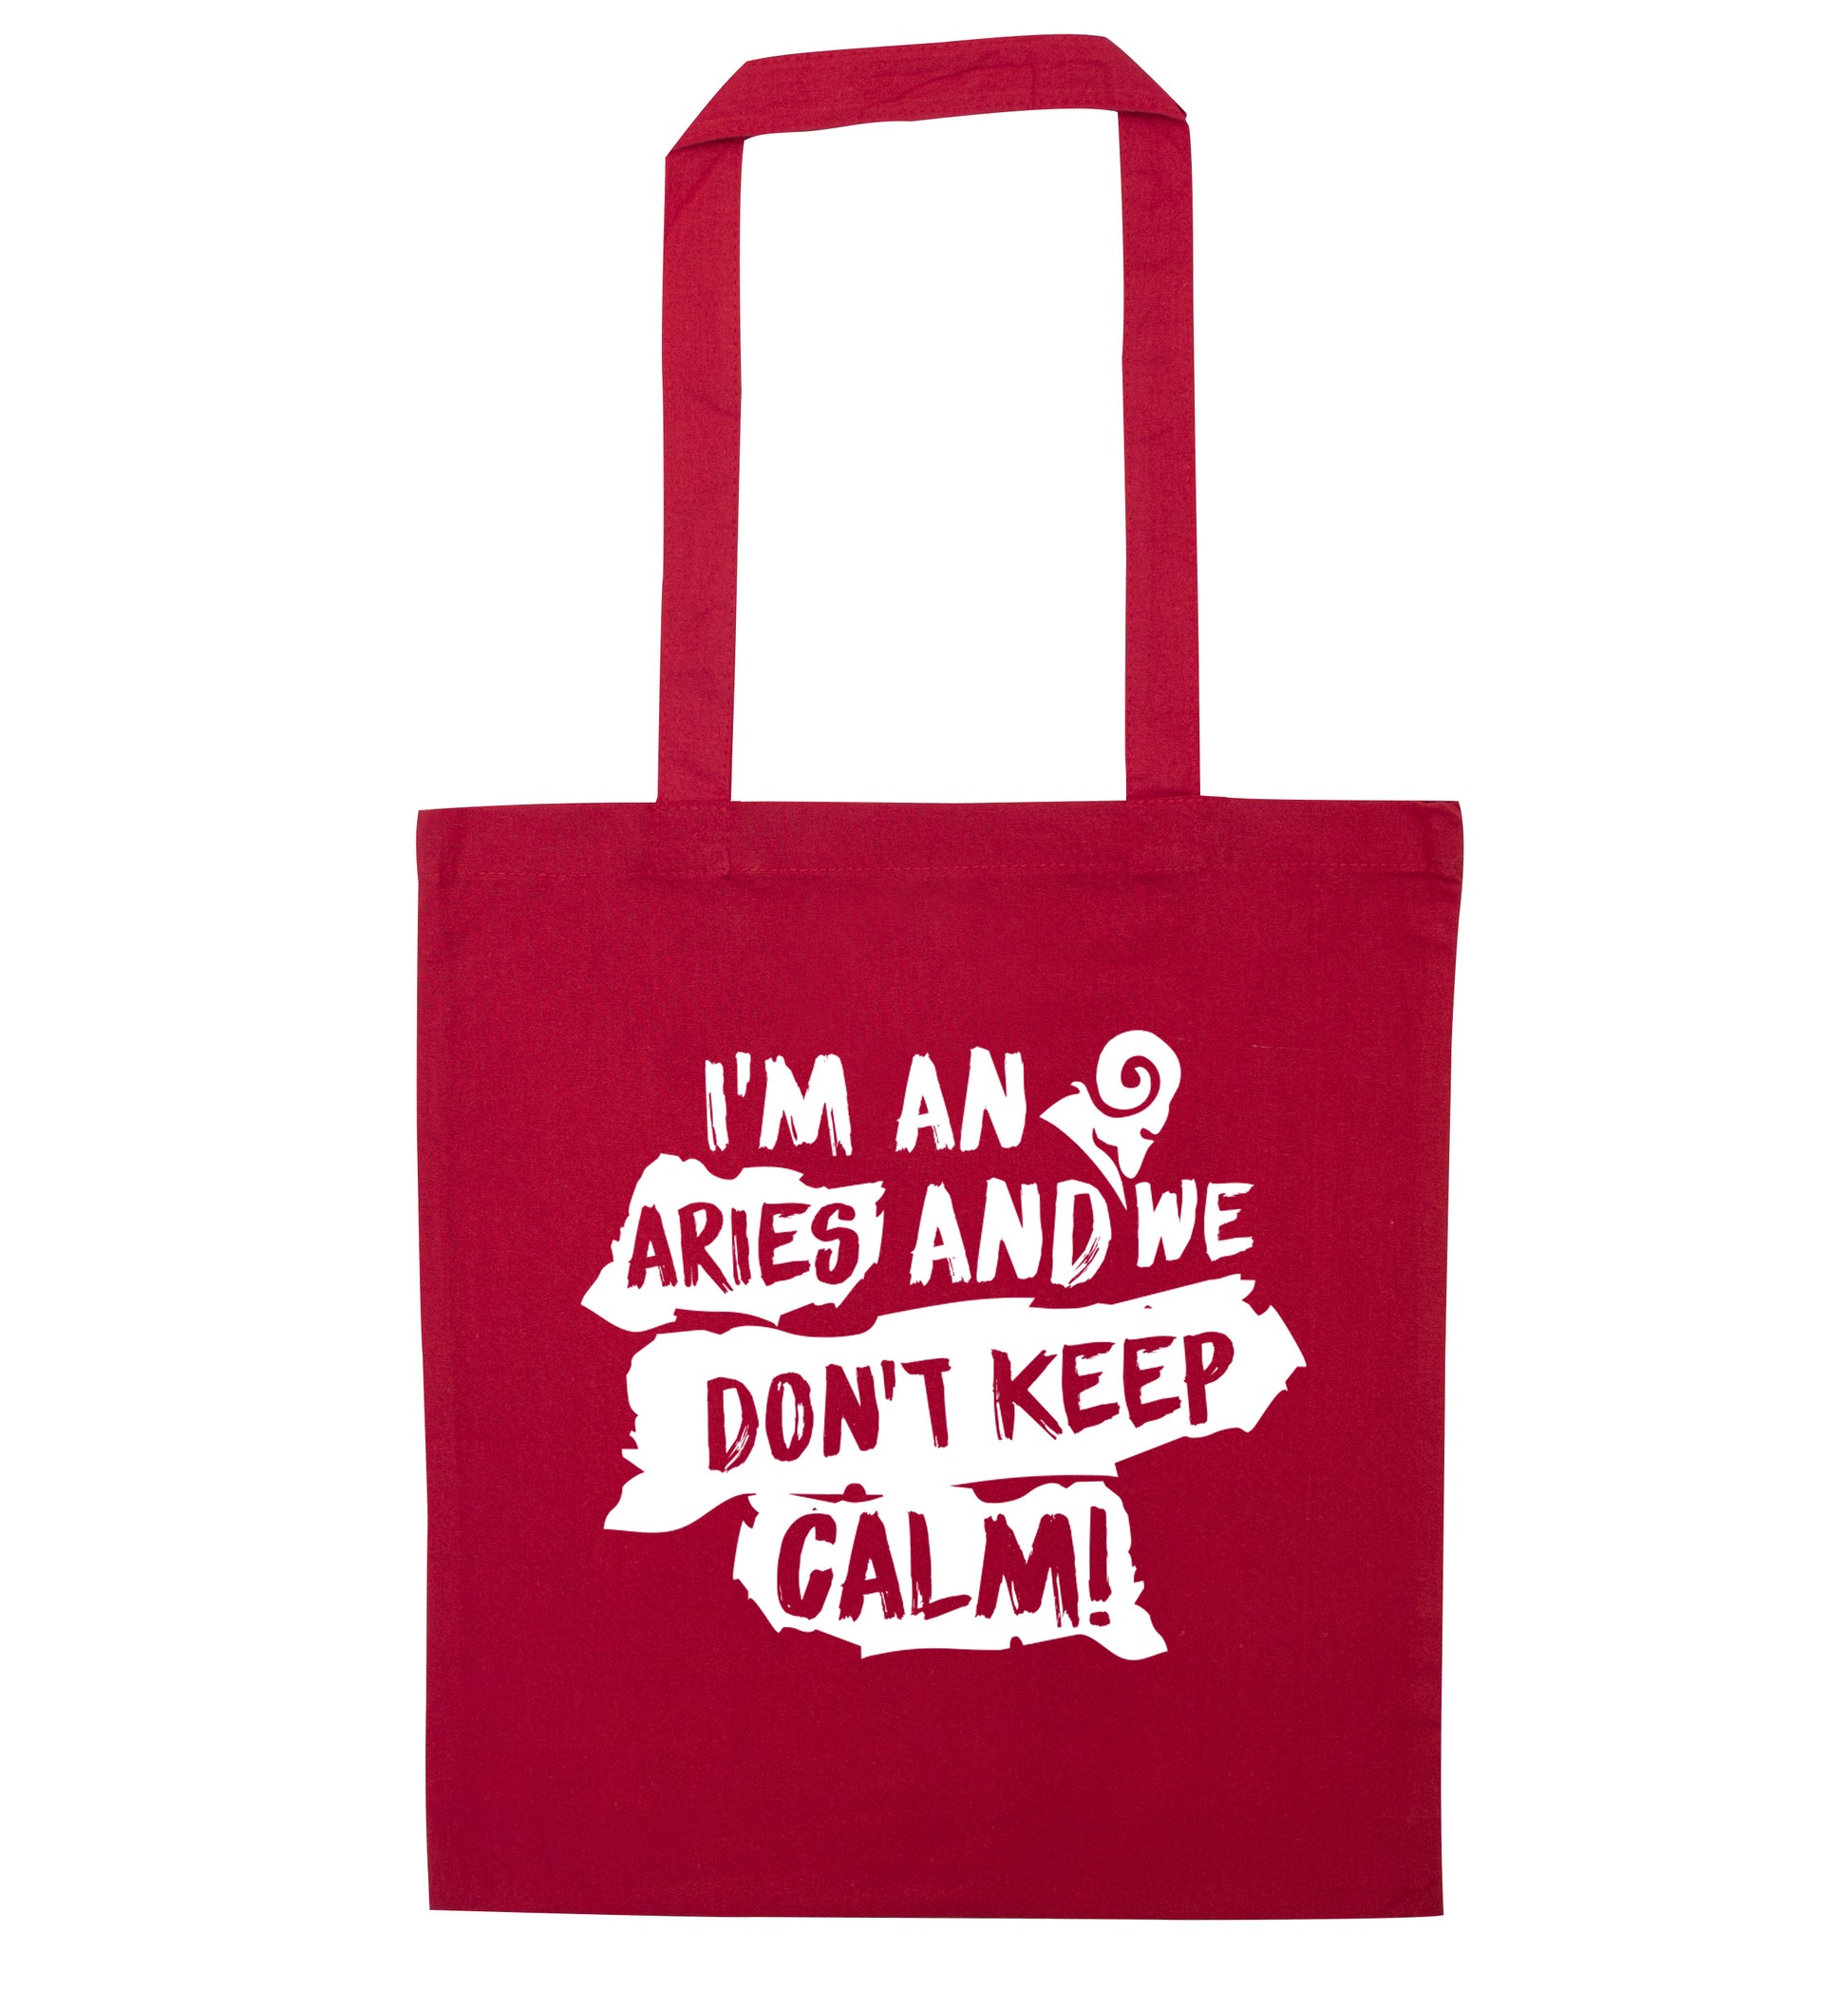 I'm an aries and we don't keep calm red tote bag